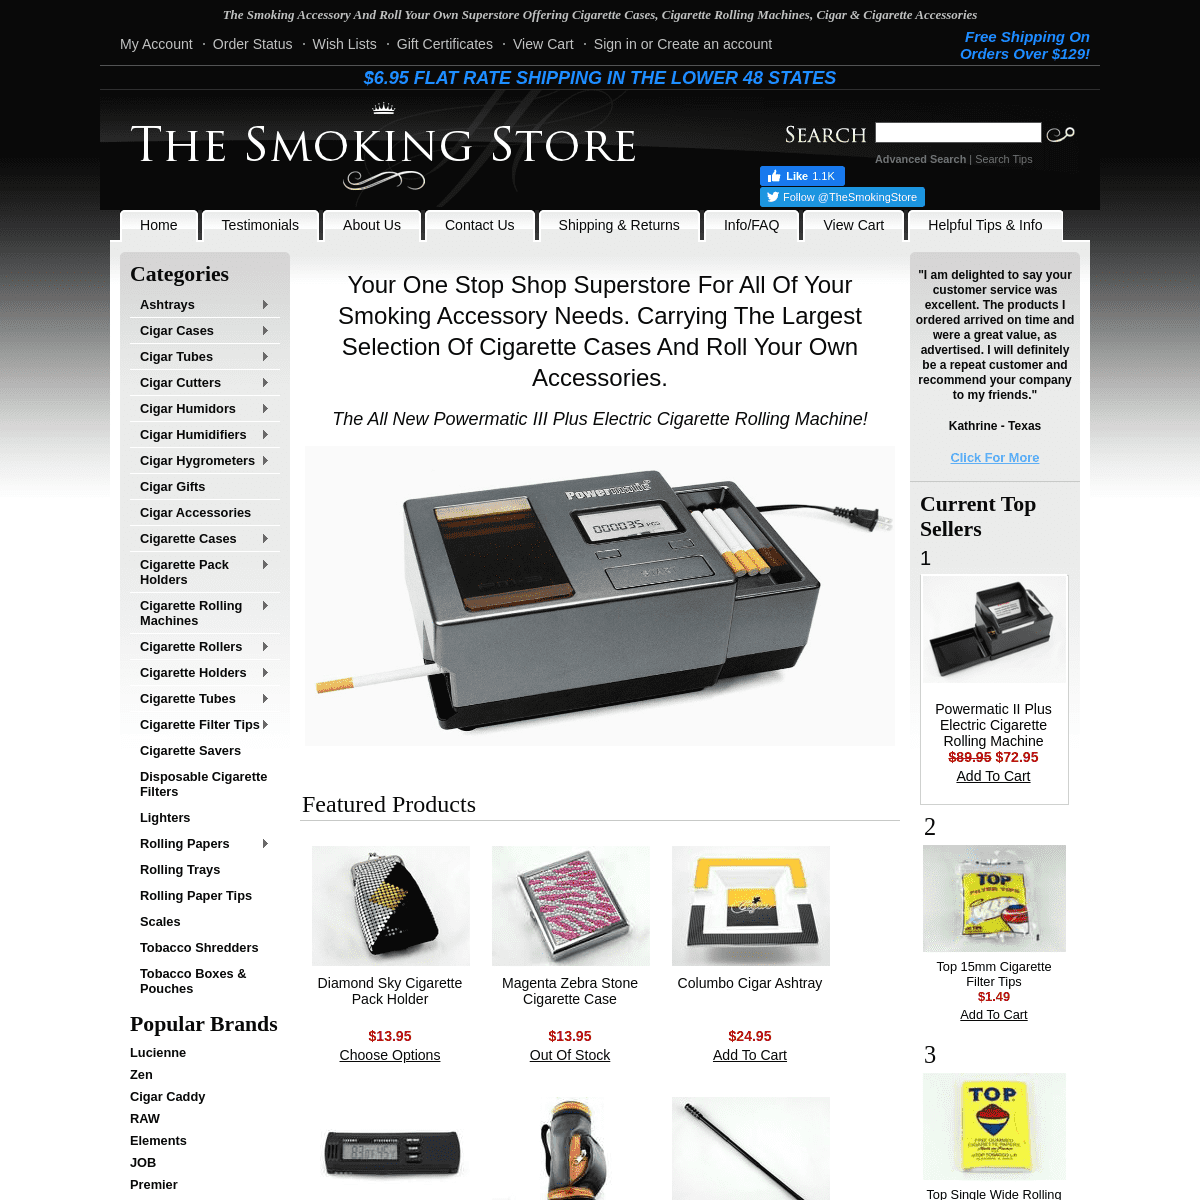 A complete backup of thesmokingstore.com